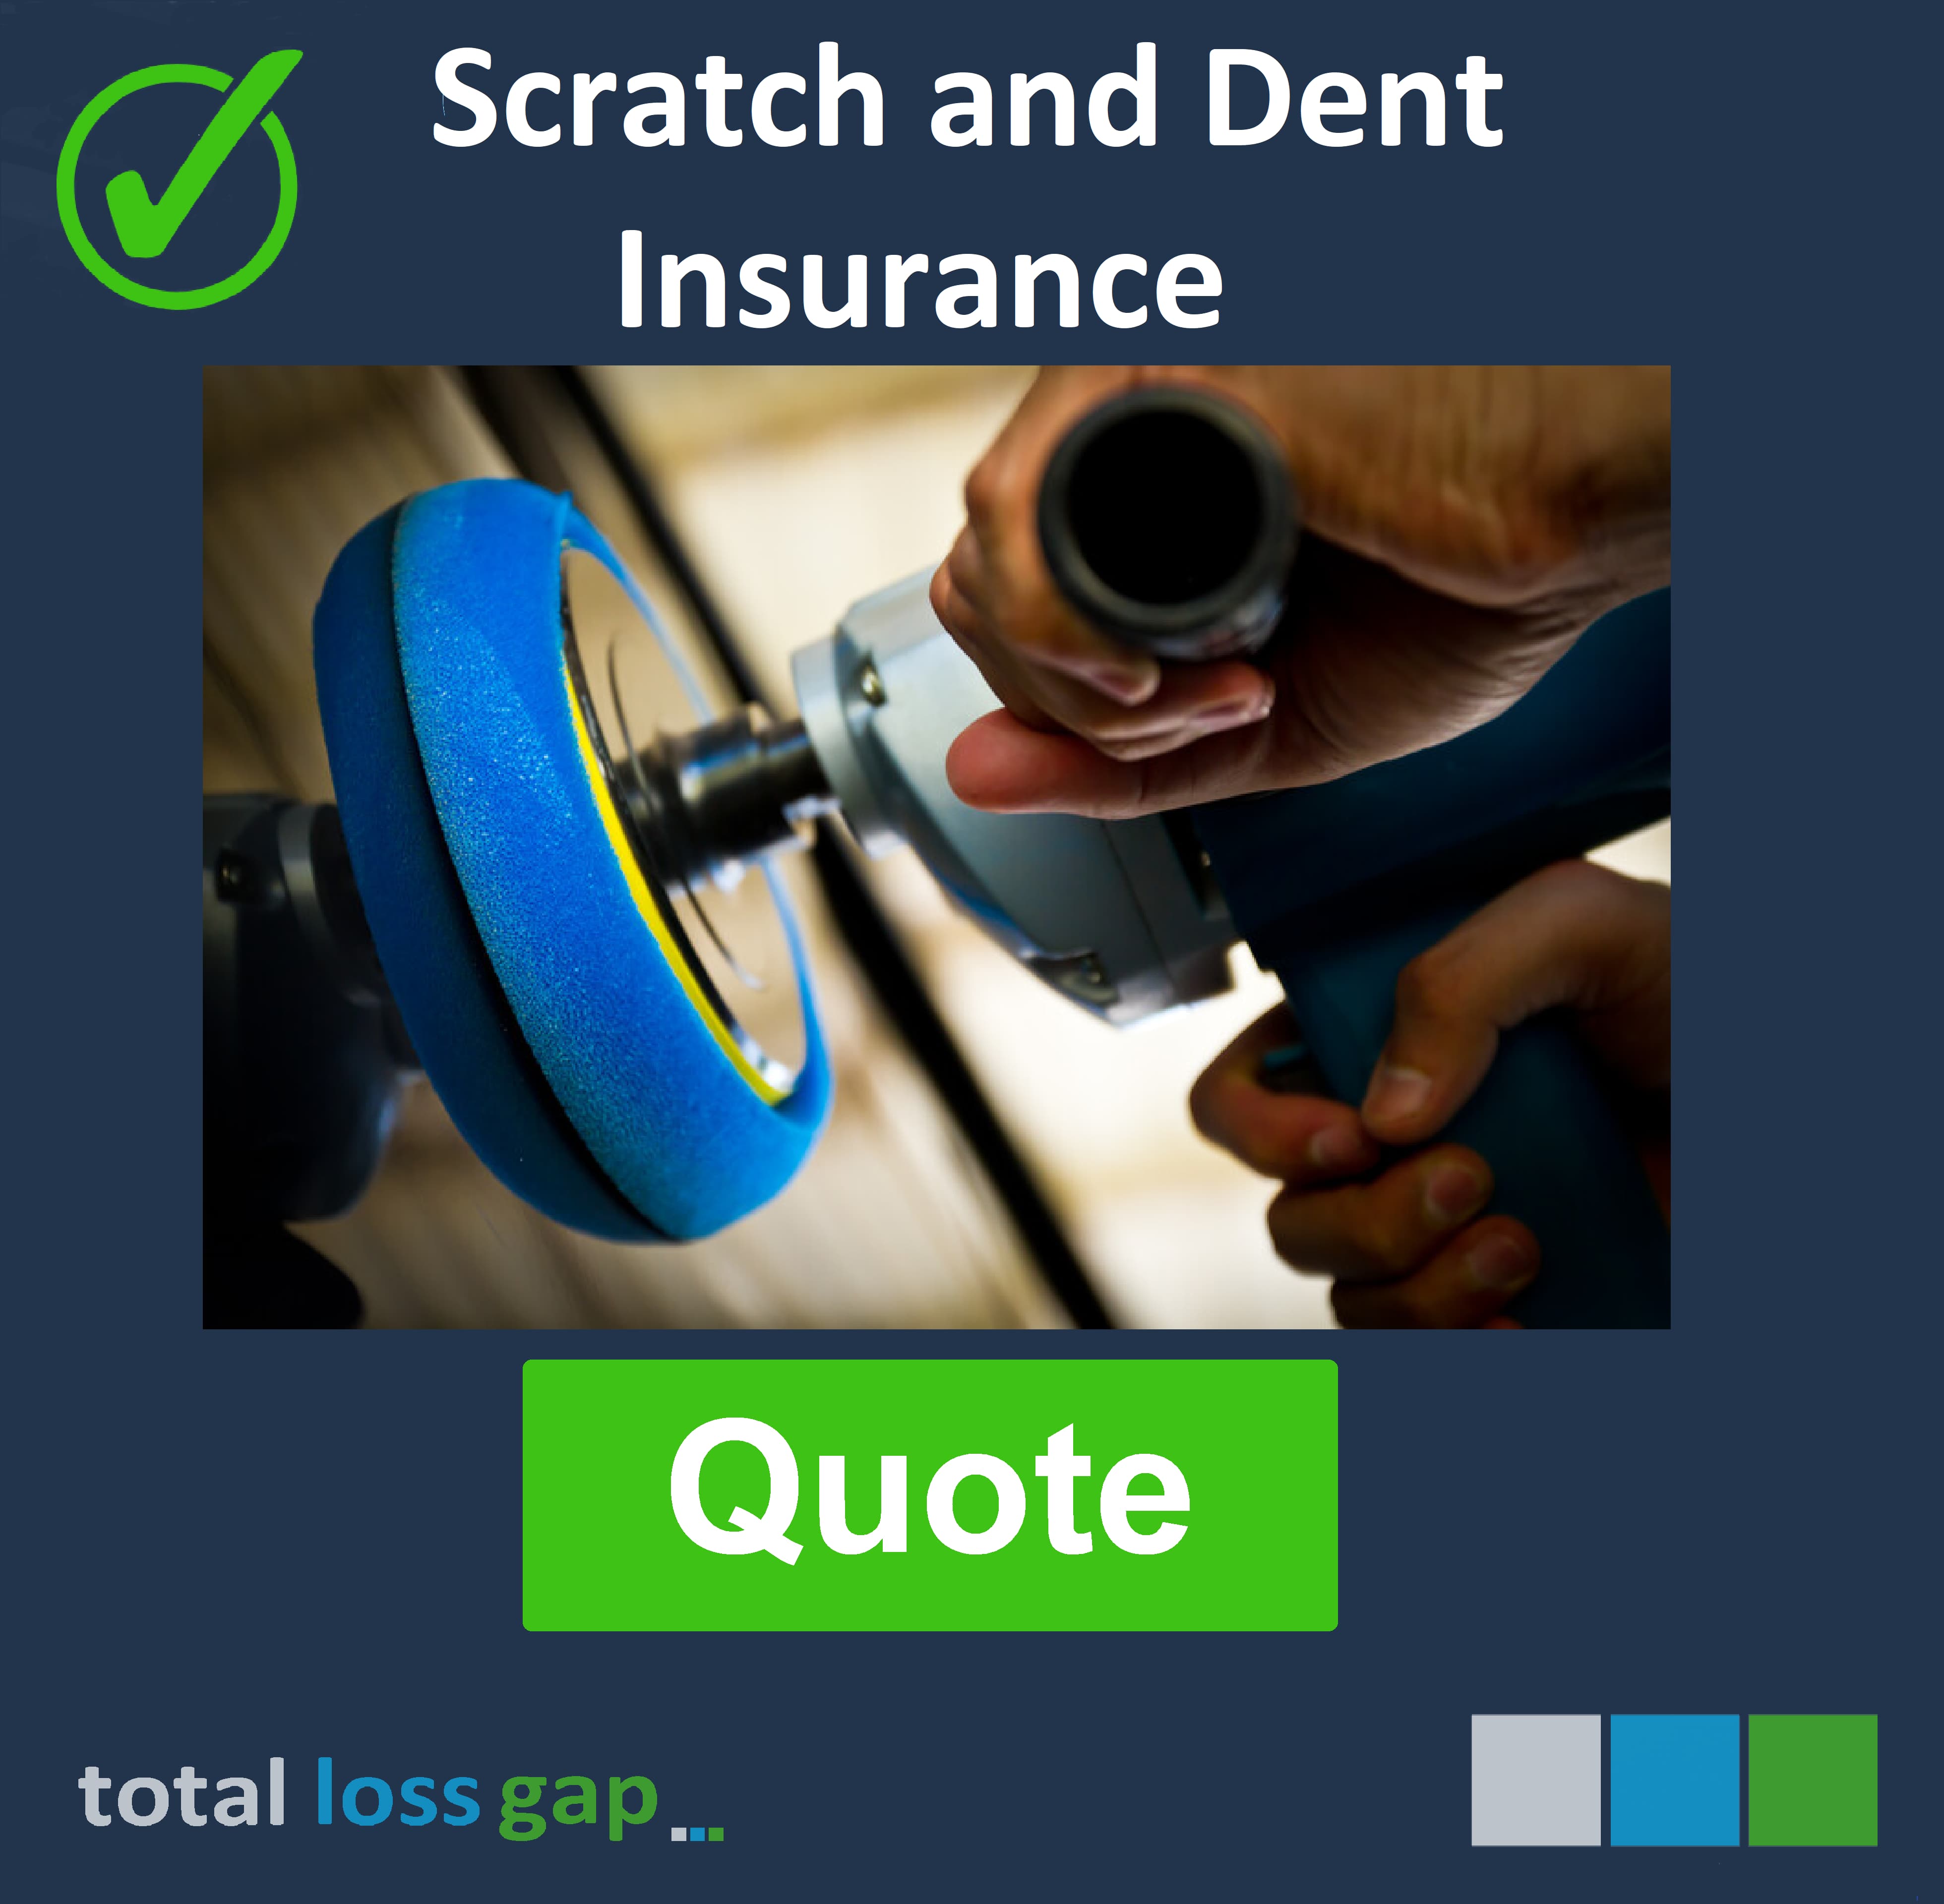 Scrath and Dent insurance for your BMW